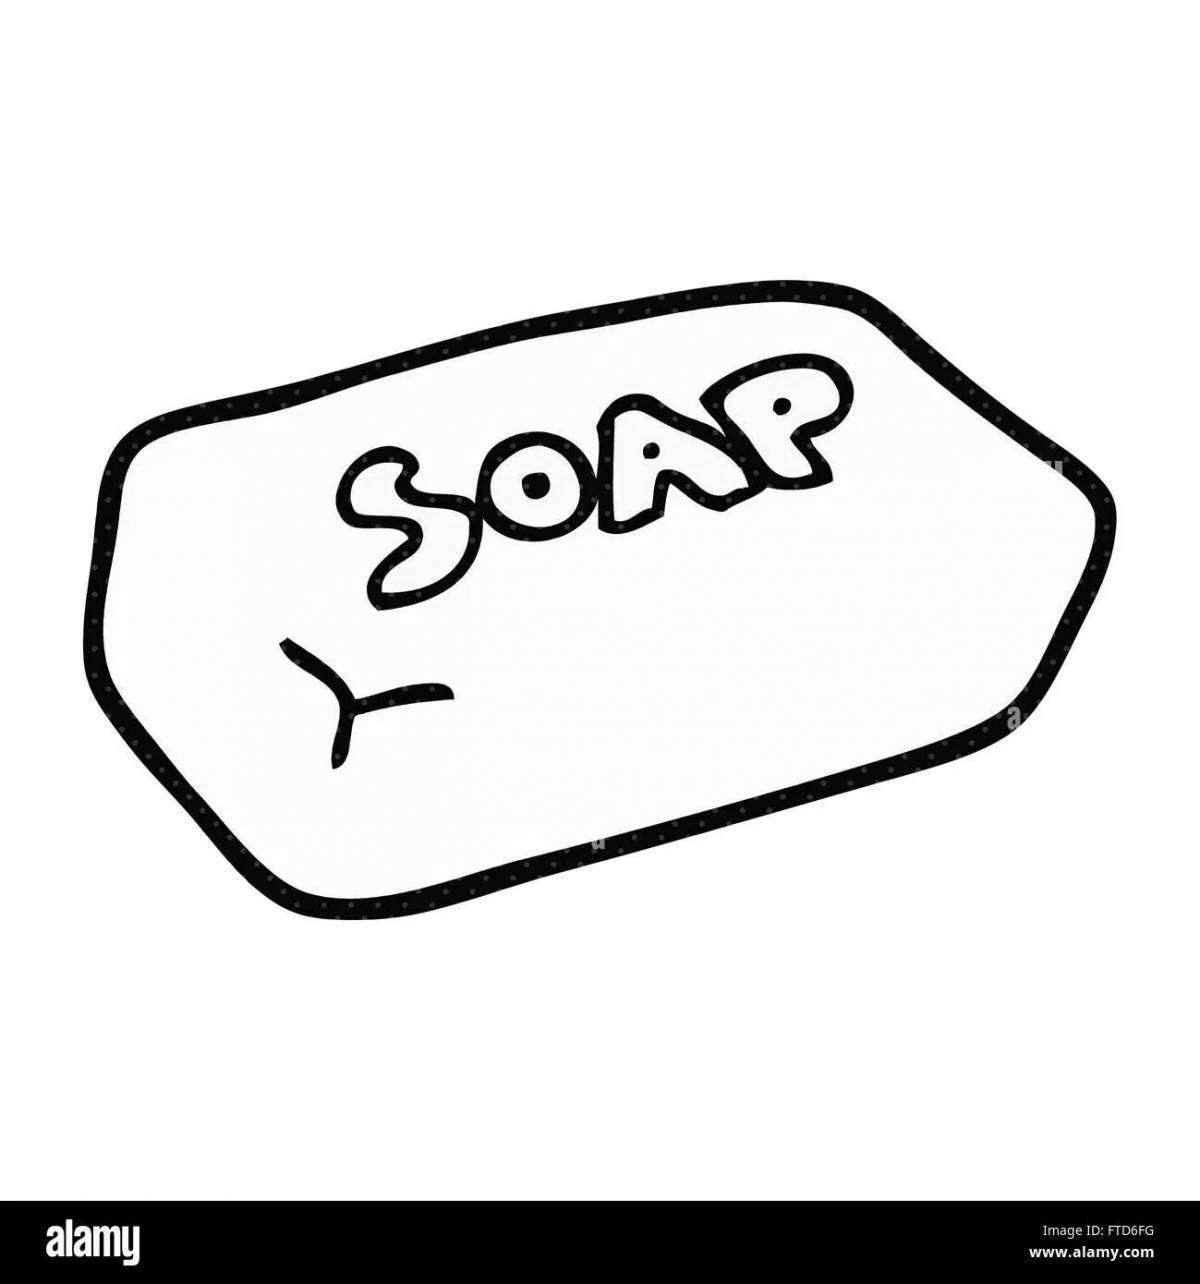 Glowing soap coloring page